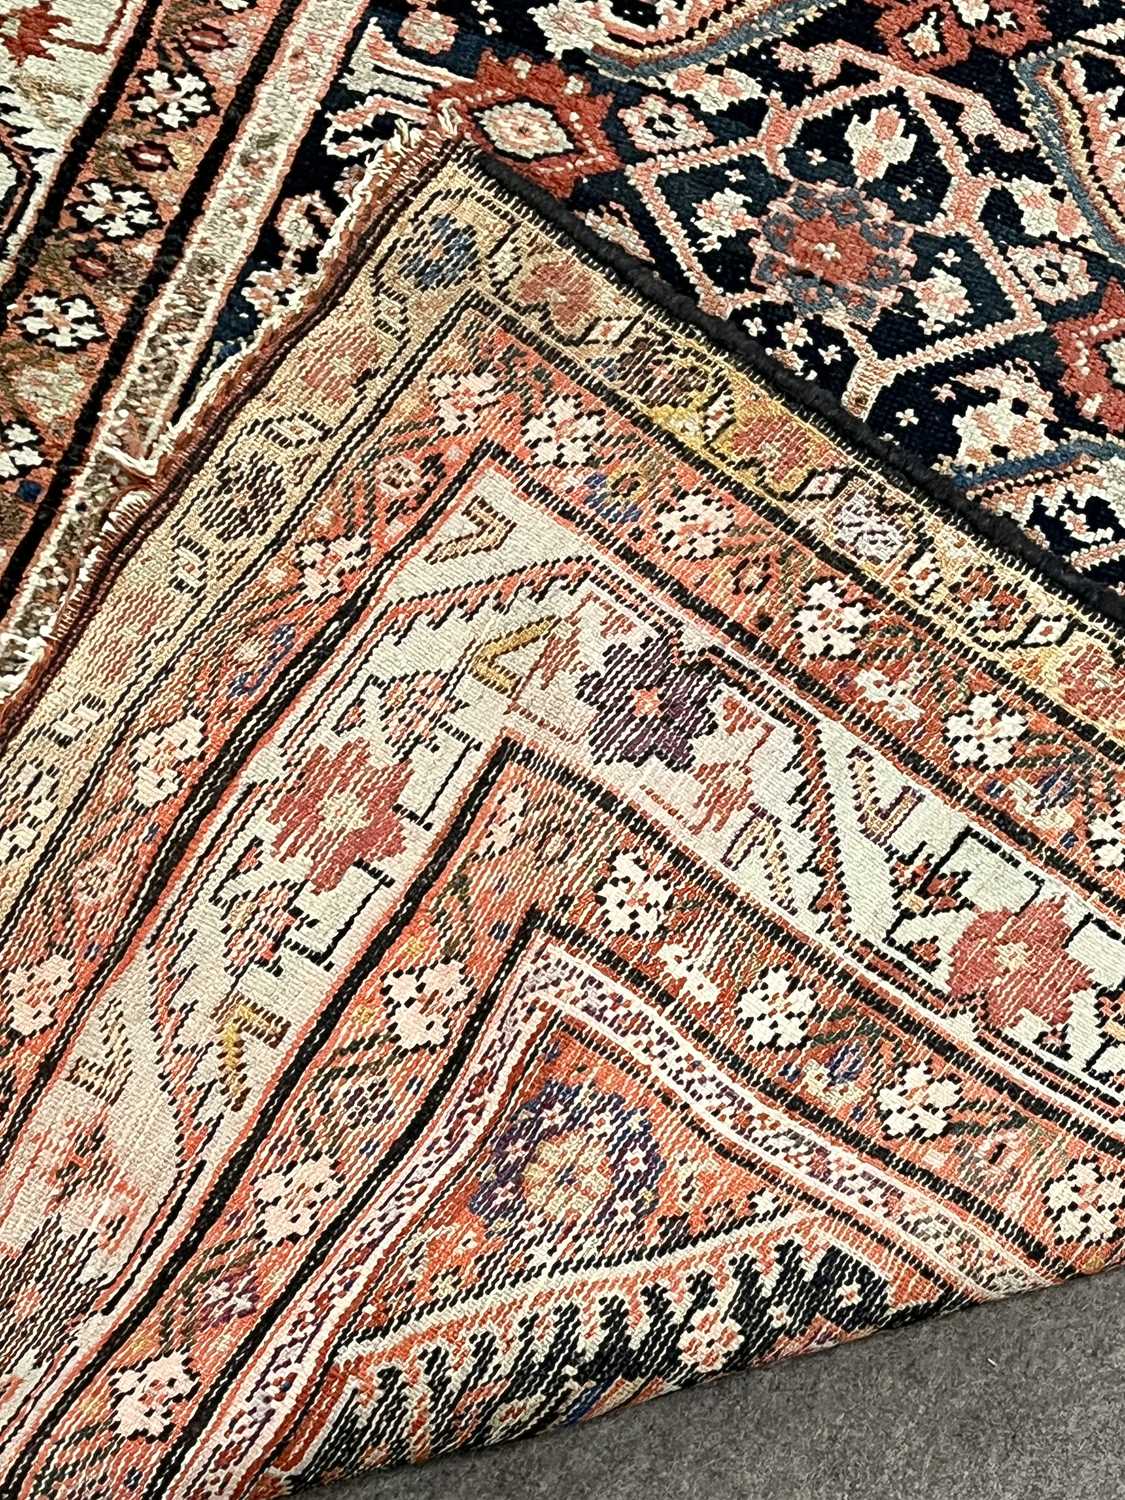 Persian wool runner carpet with central leaf design 108 x 375cm - Image 4 of 4